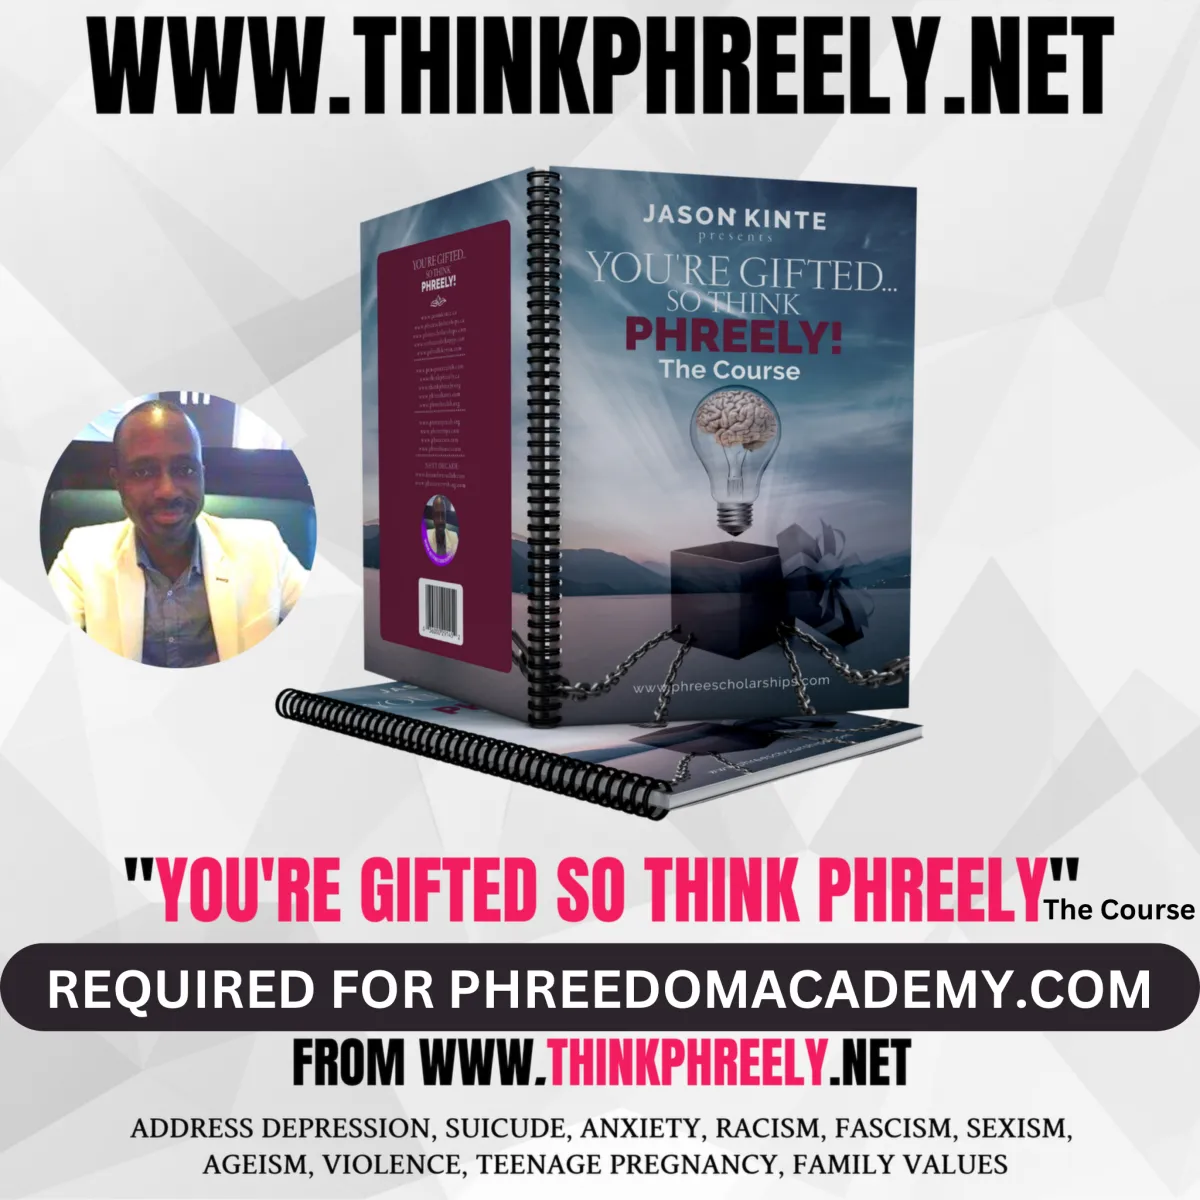 “You’re Gifted So Think Phreely-The Course